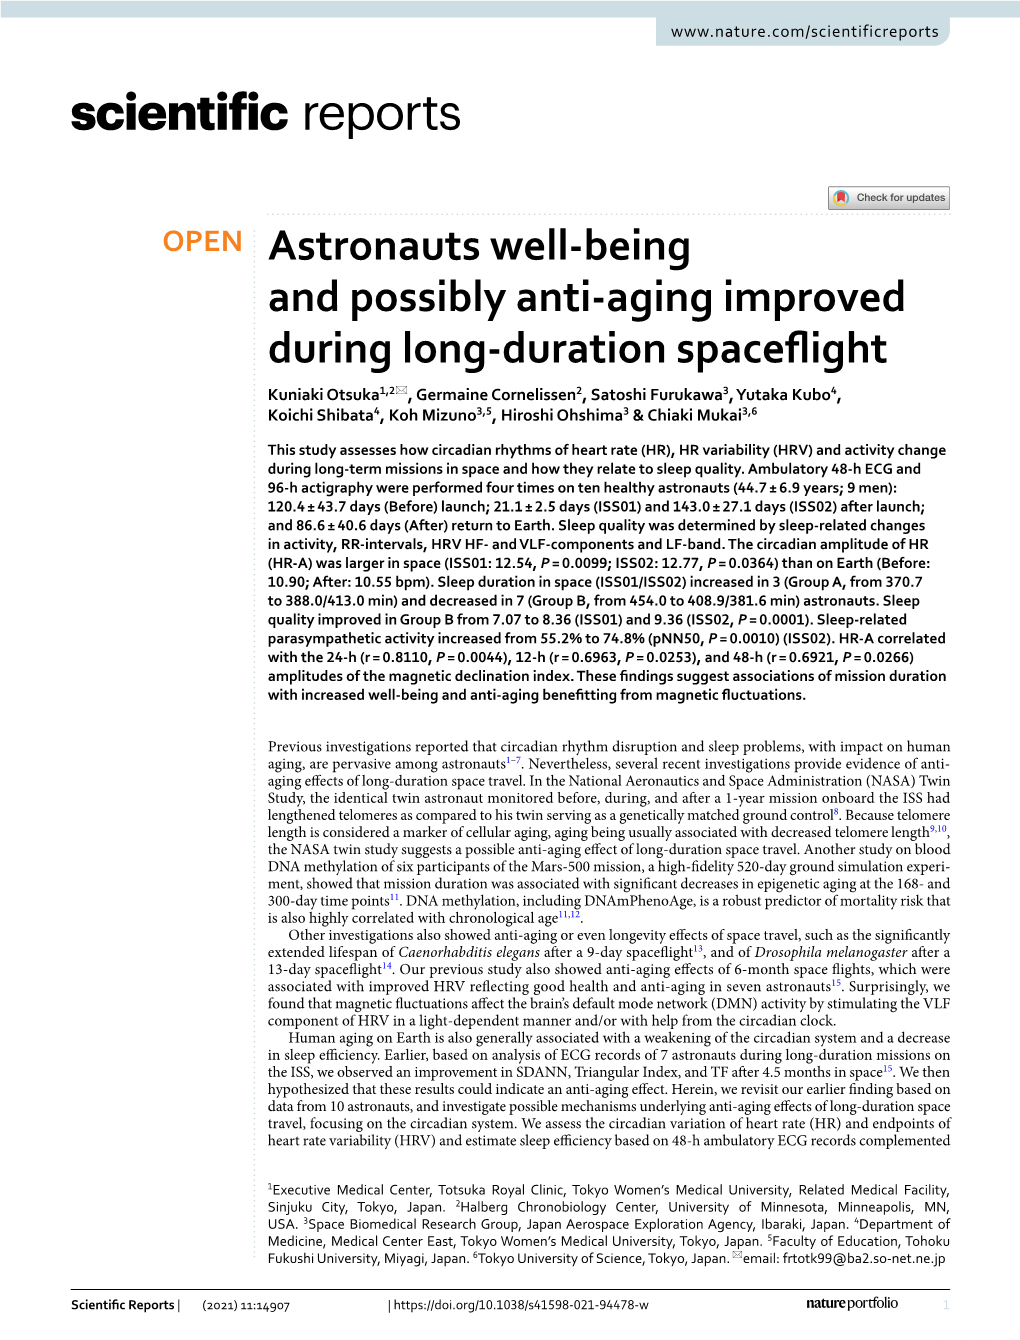 Astronauts Well-Being and Possibly Anti-Aging Improved During Long